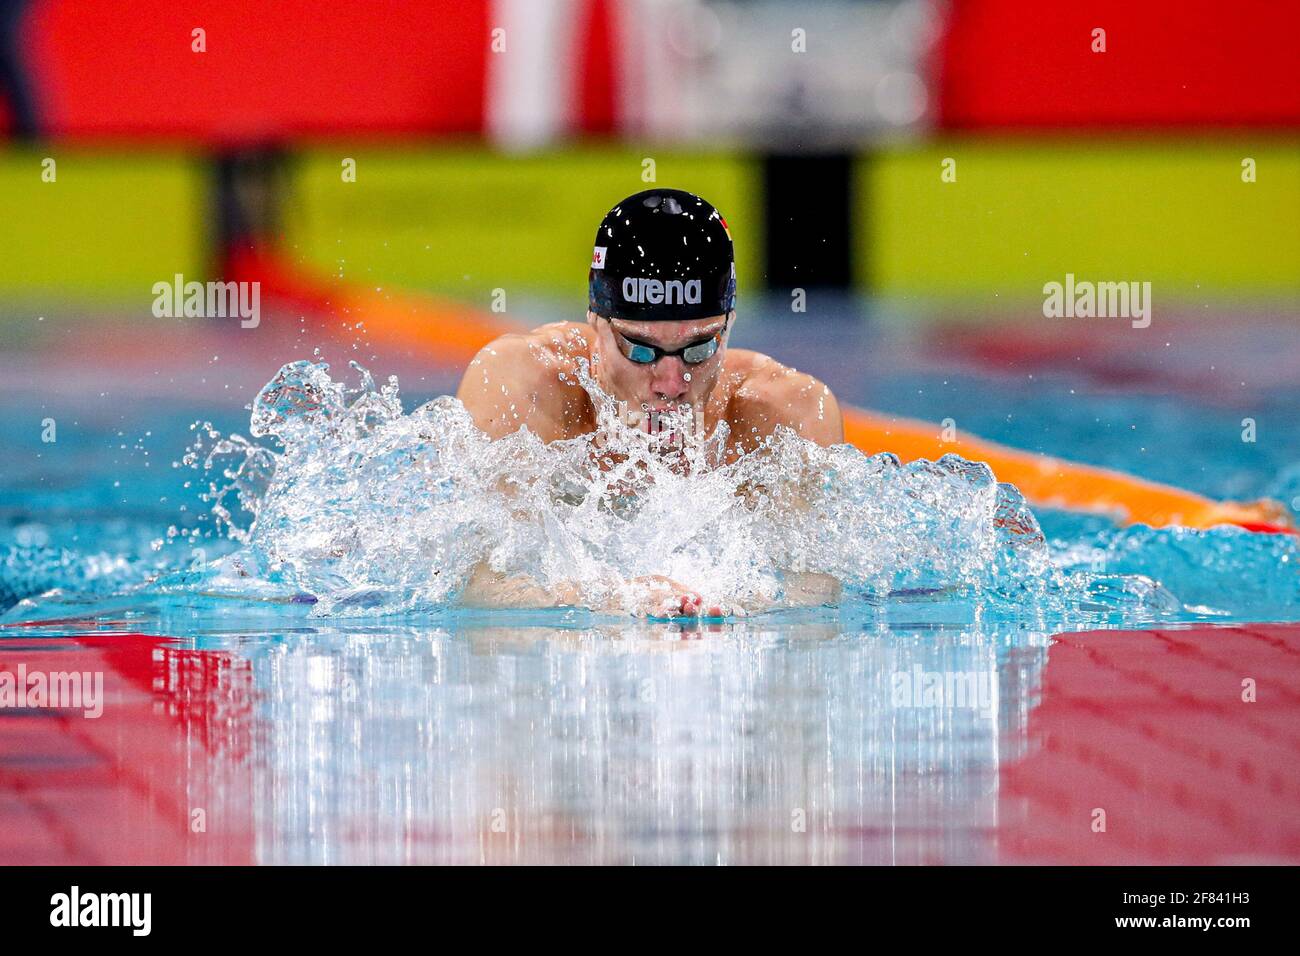 EINDHOVEN, NETHERLANDS - APRIL 11: Maximilian Pilger of Germany competing in the Men 200m Breaststroke finals during the Eindhoven Qualification Meet Stock Photo